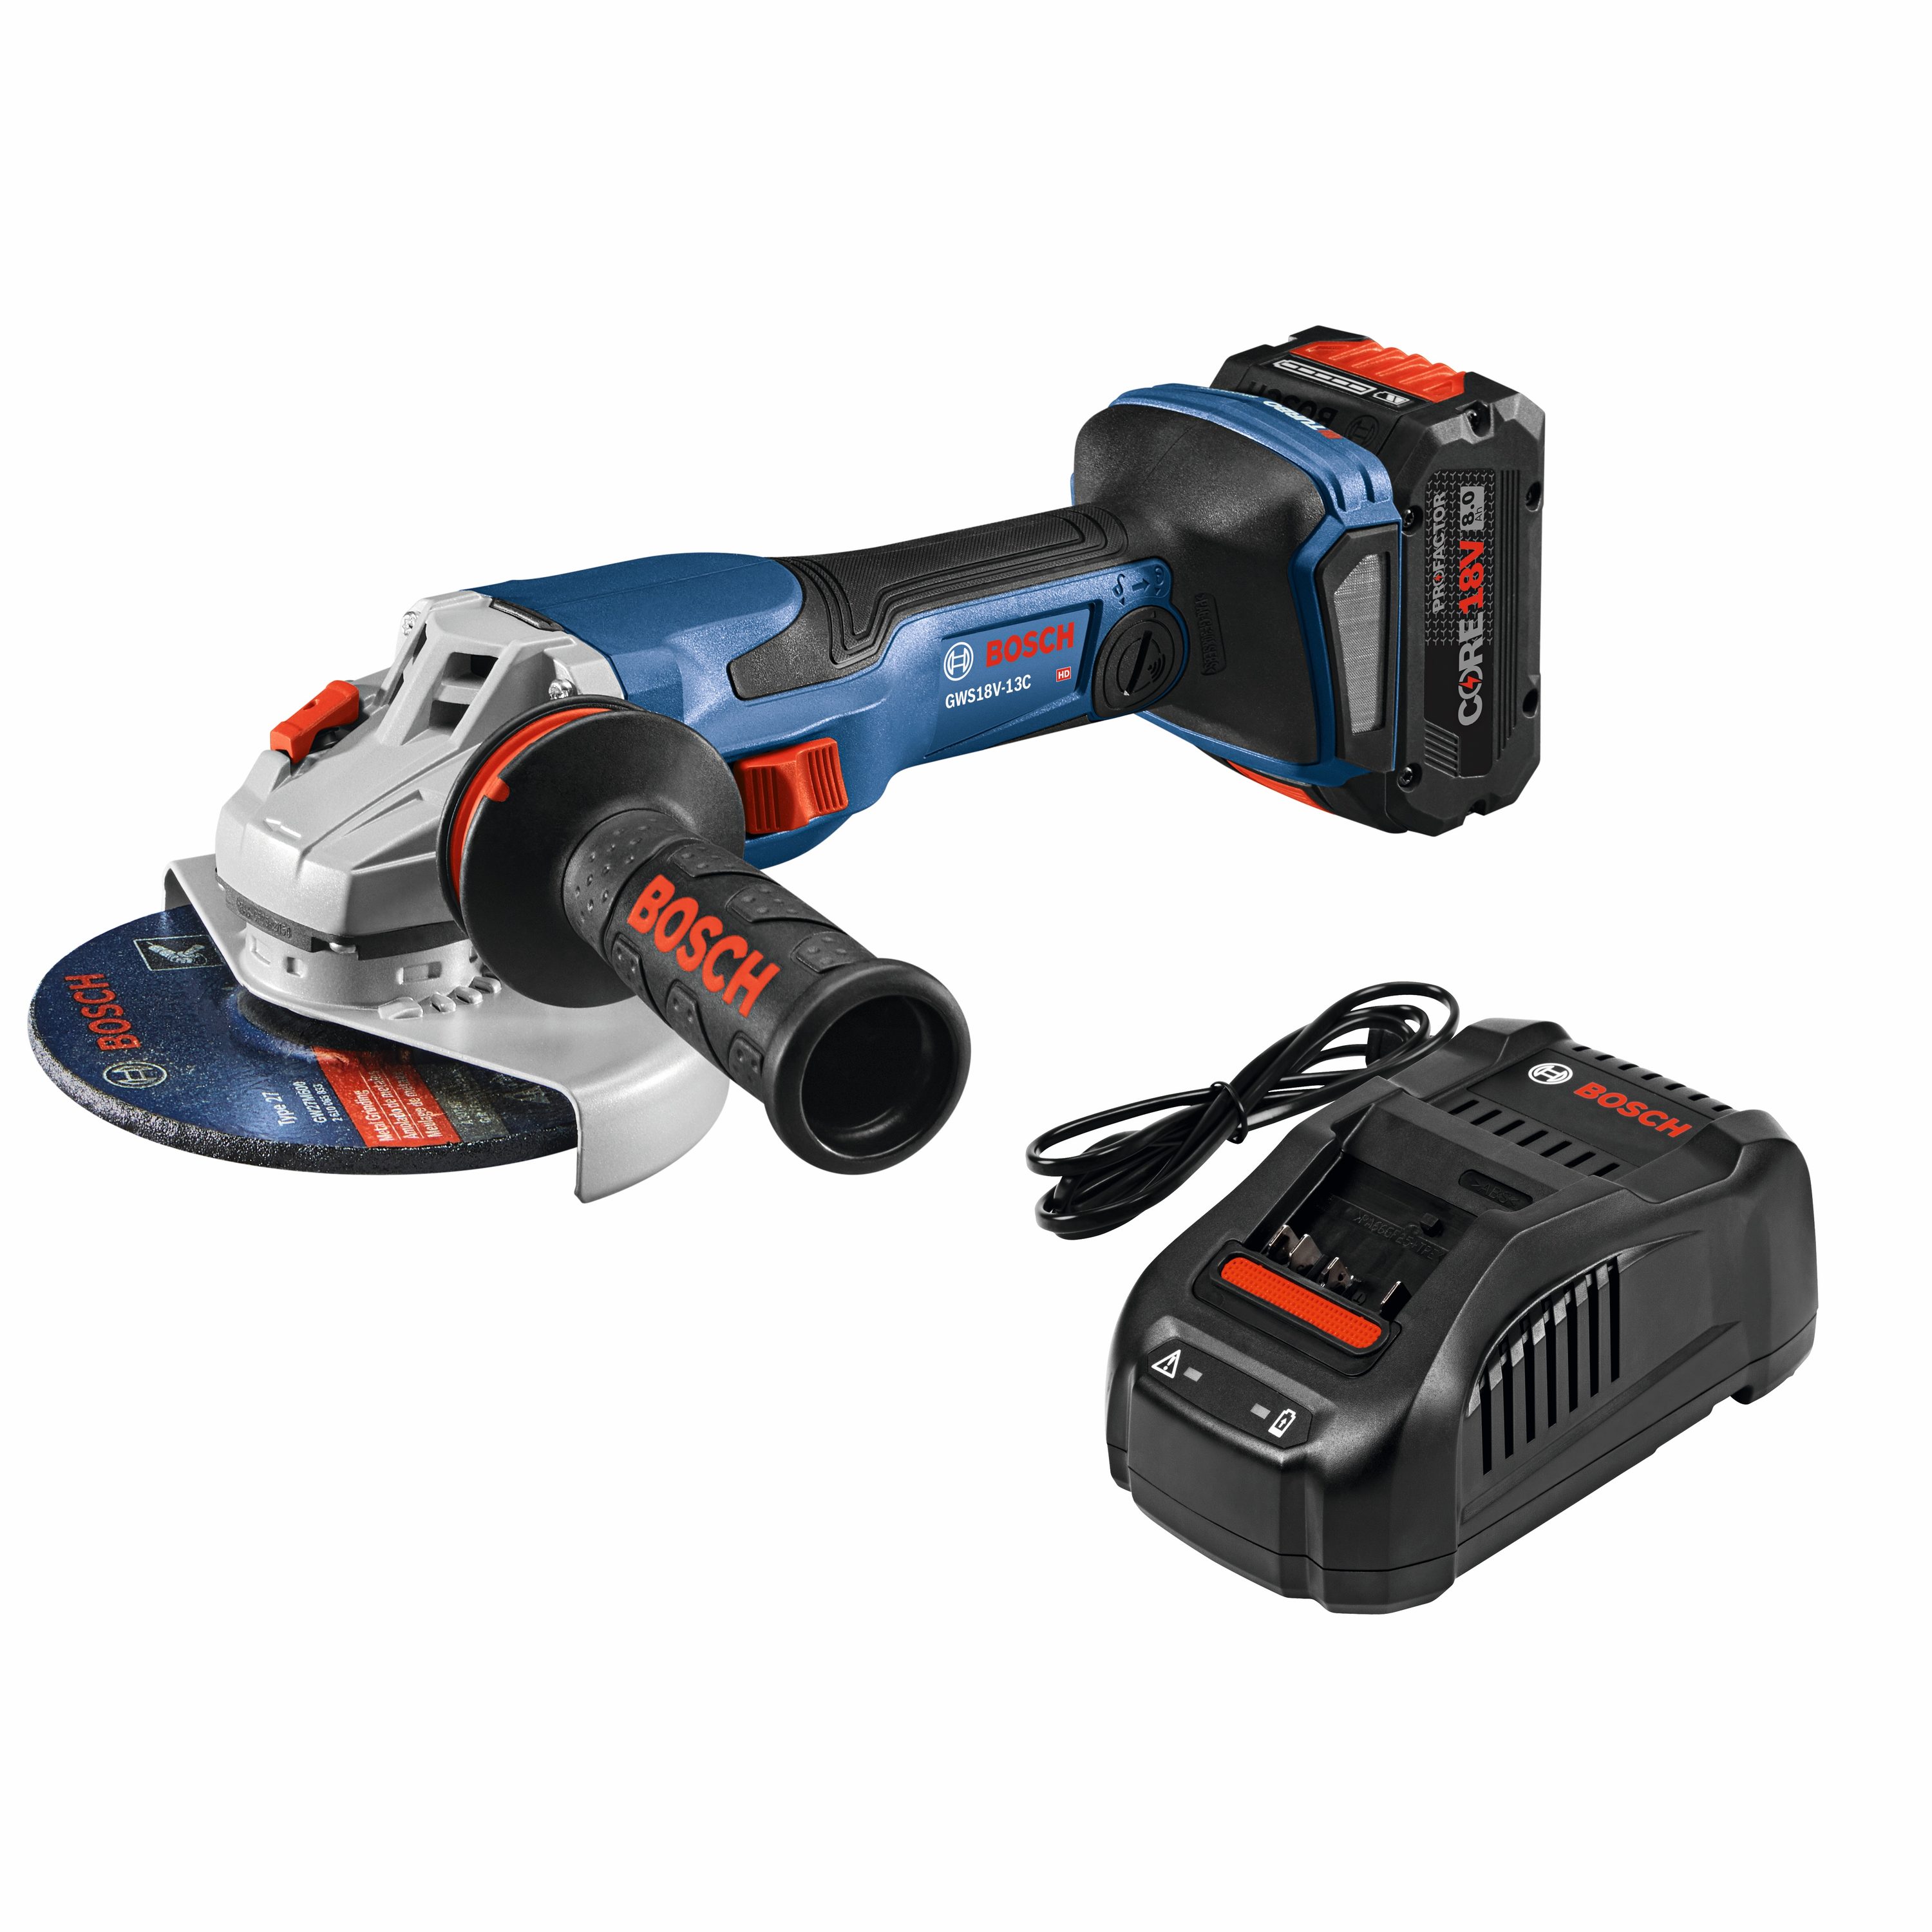 Bosch 6-in 18-volt 8 Amps Sliding Switch Brushless Cordless Angle